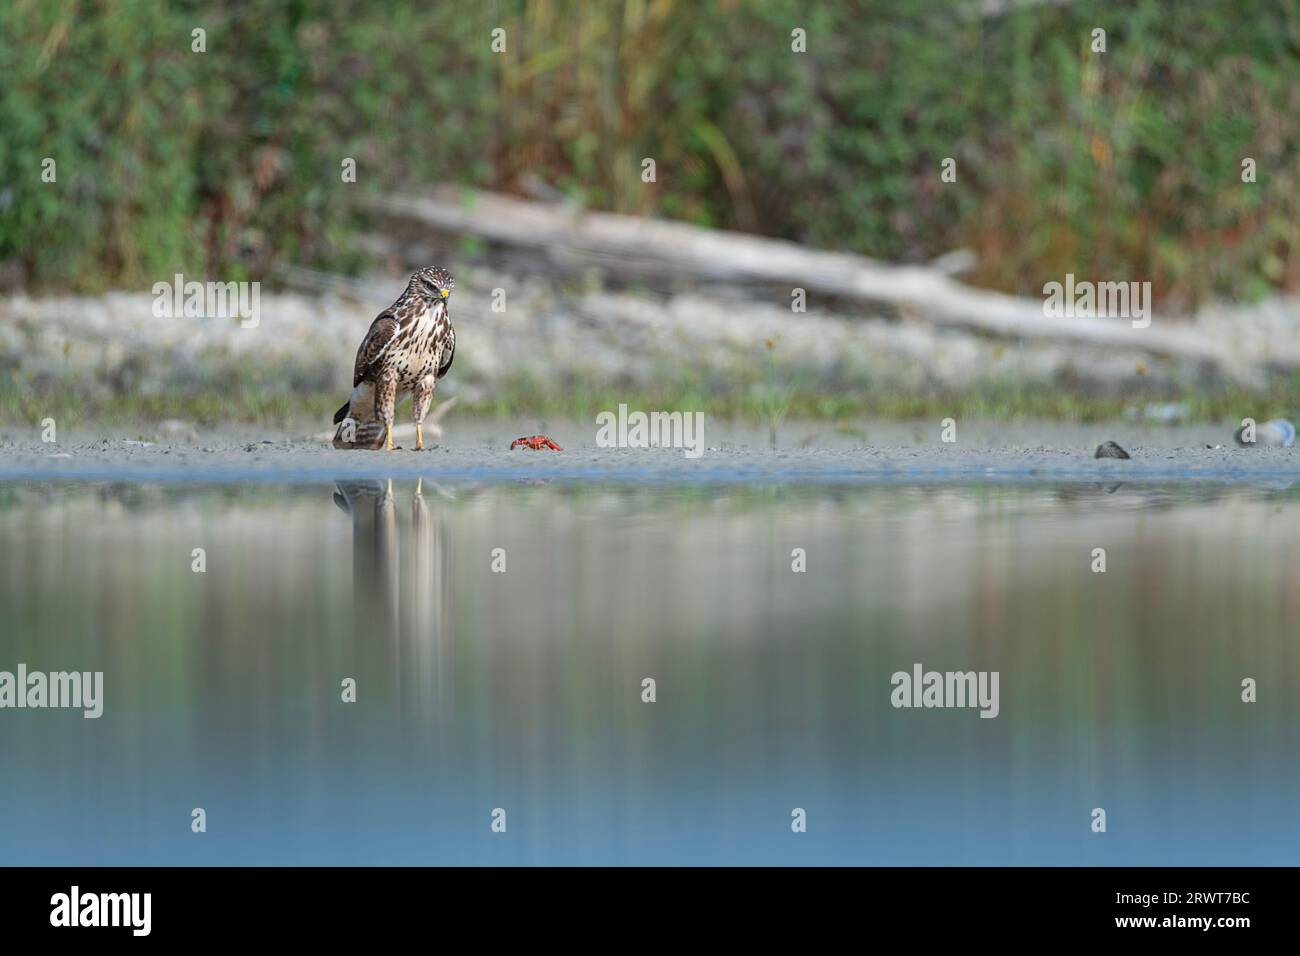 Face to face between common buzzard and the red swamp crayfish (Buteo buteo and Procambarus clarkii) Stock Photo